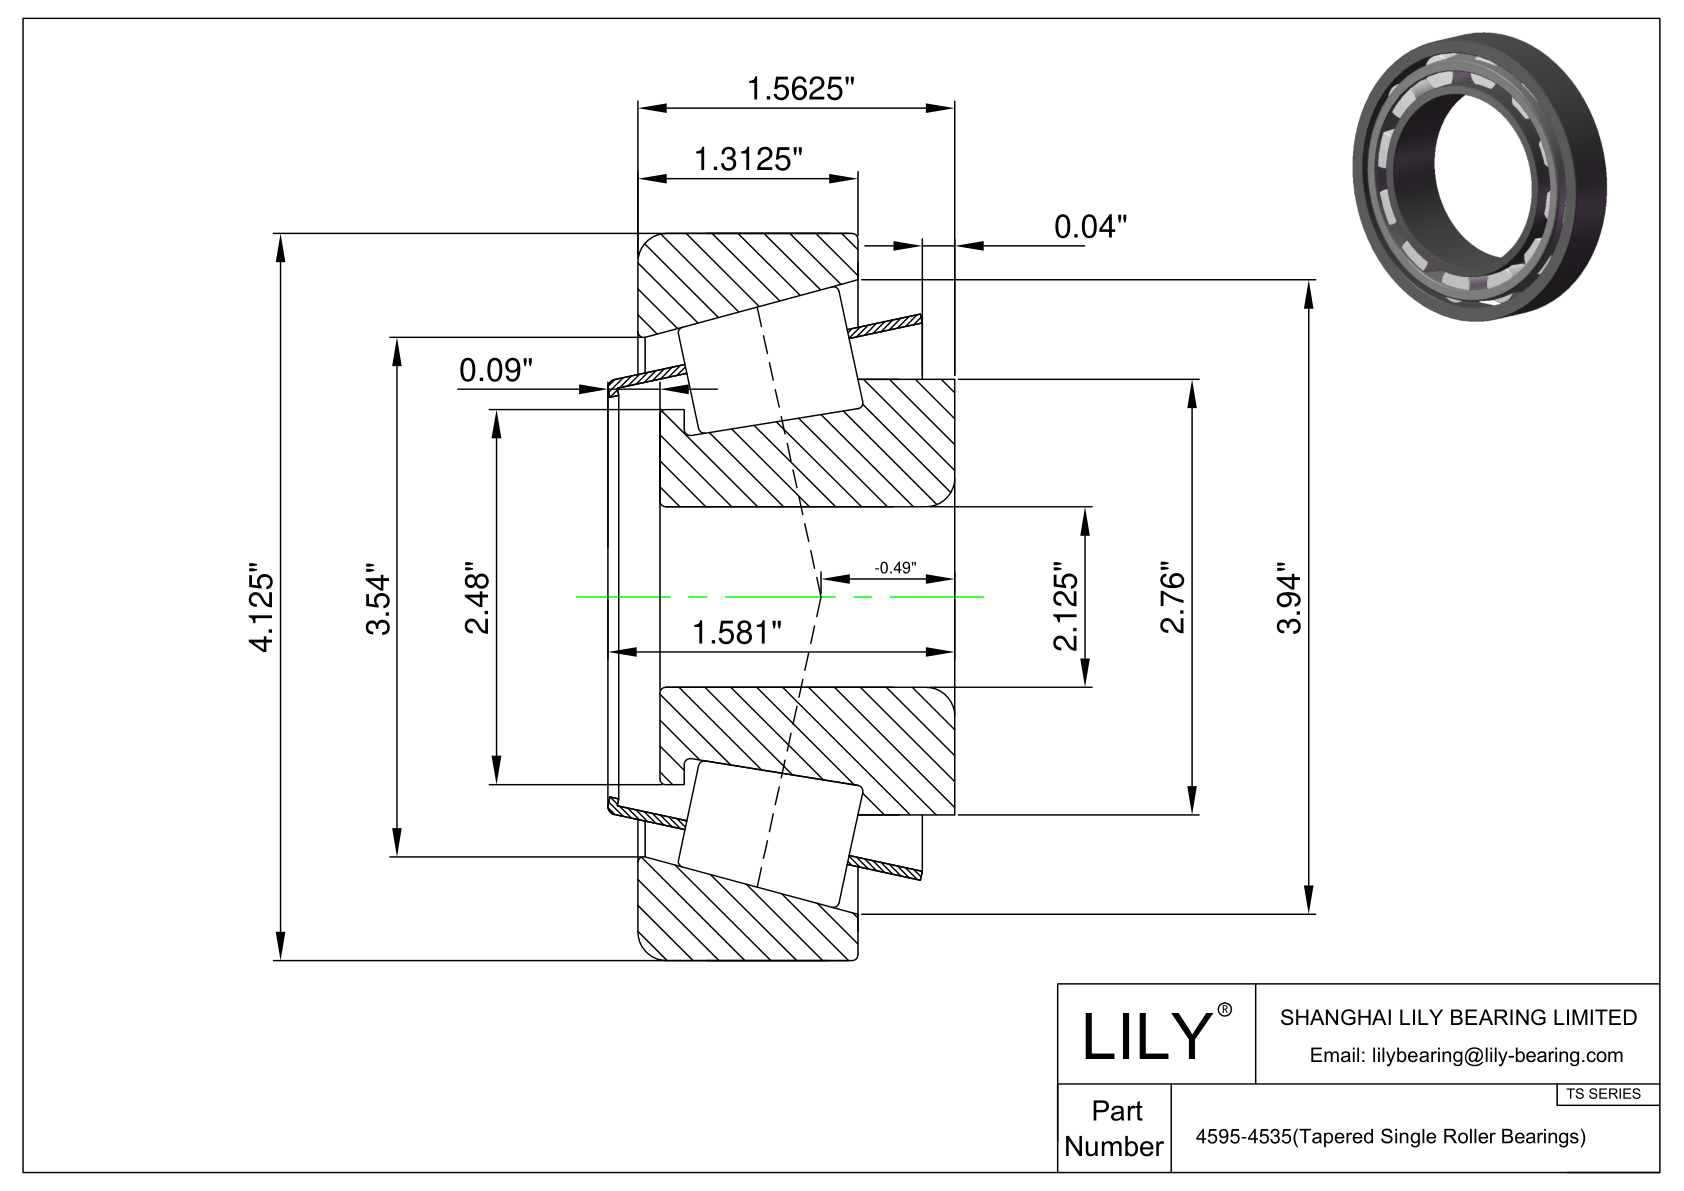 4595-4535 TS (Tapered Single Roller Bearings) (Imperial) cad drawing